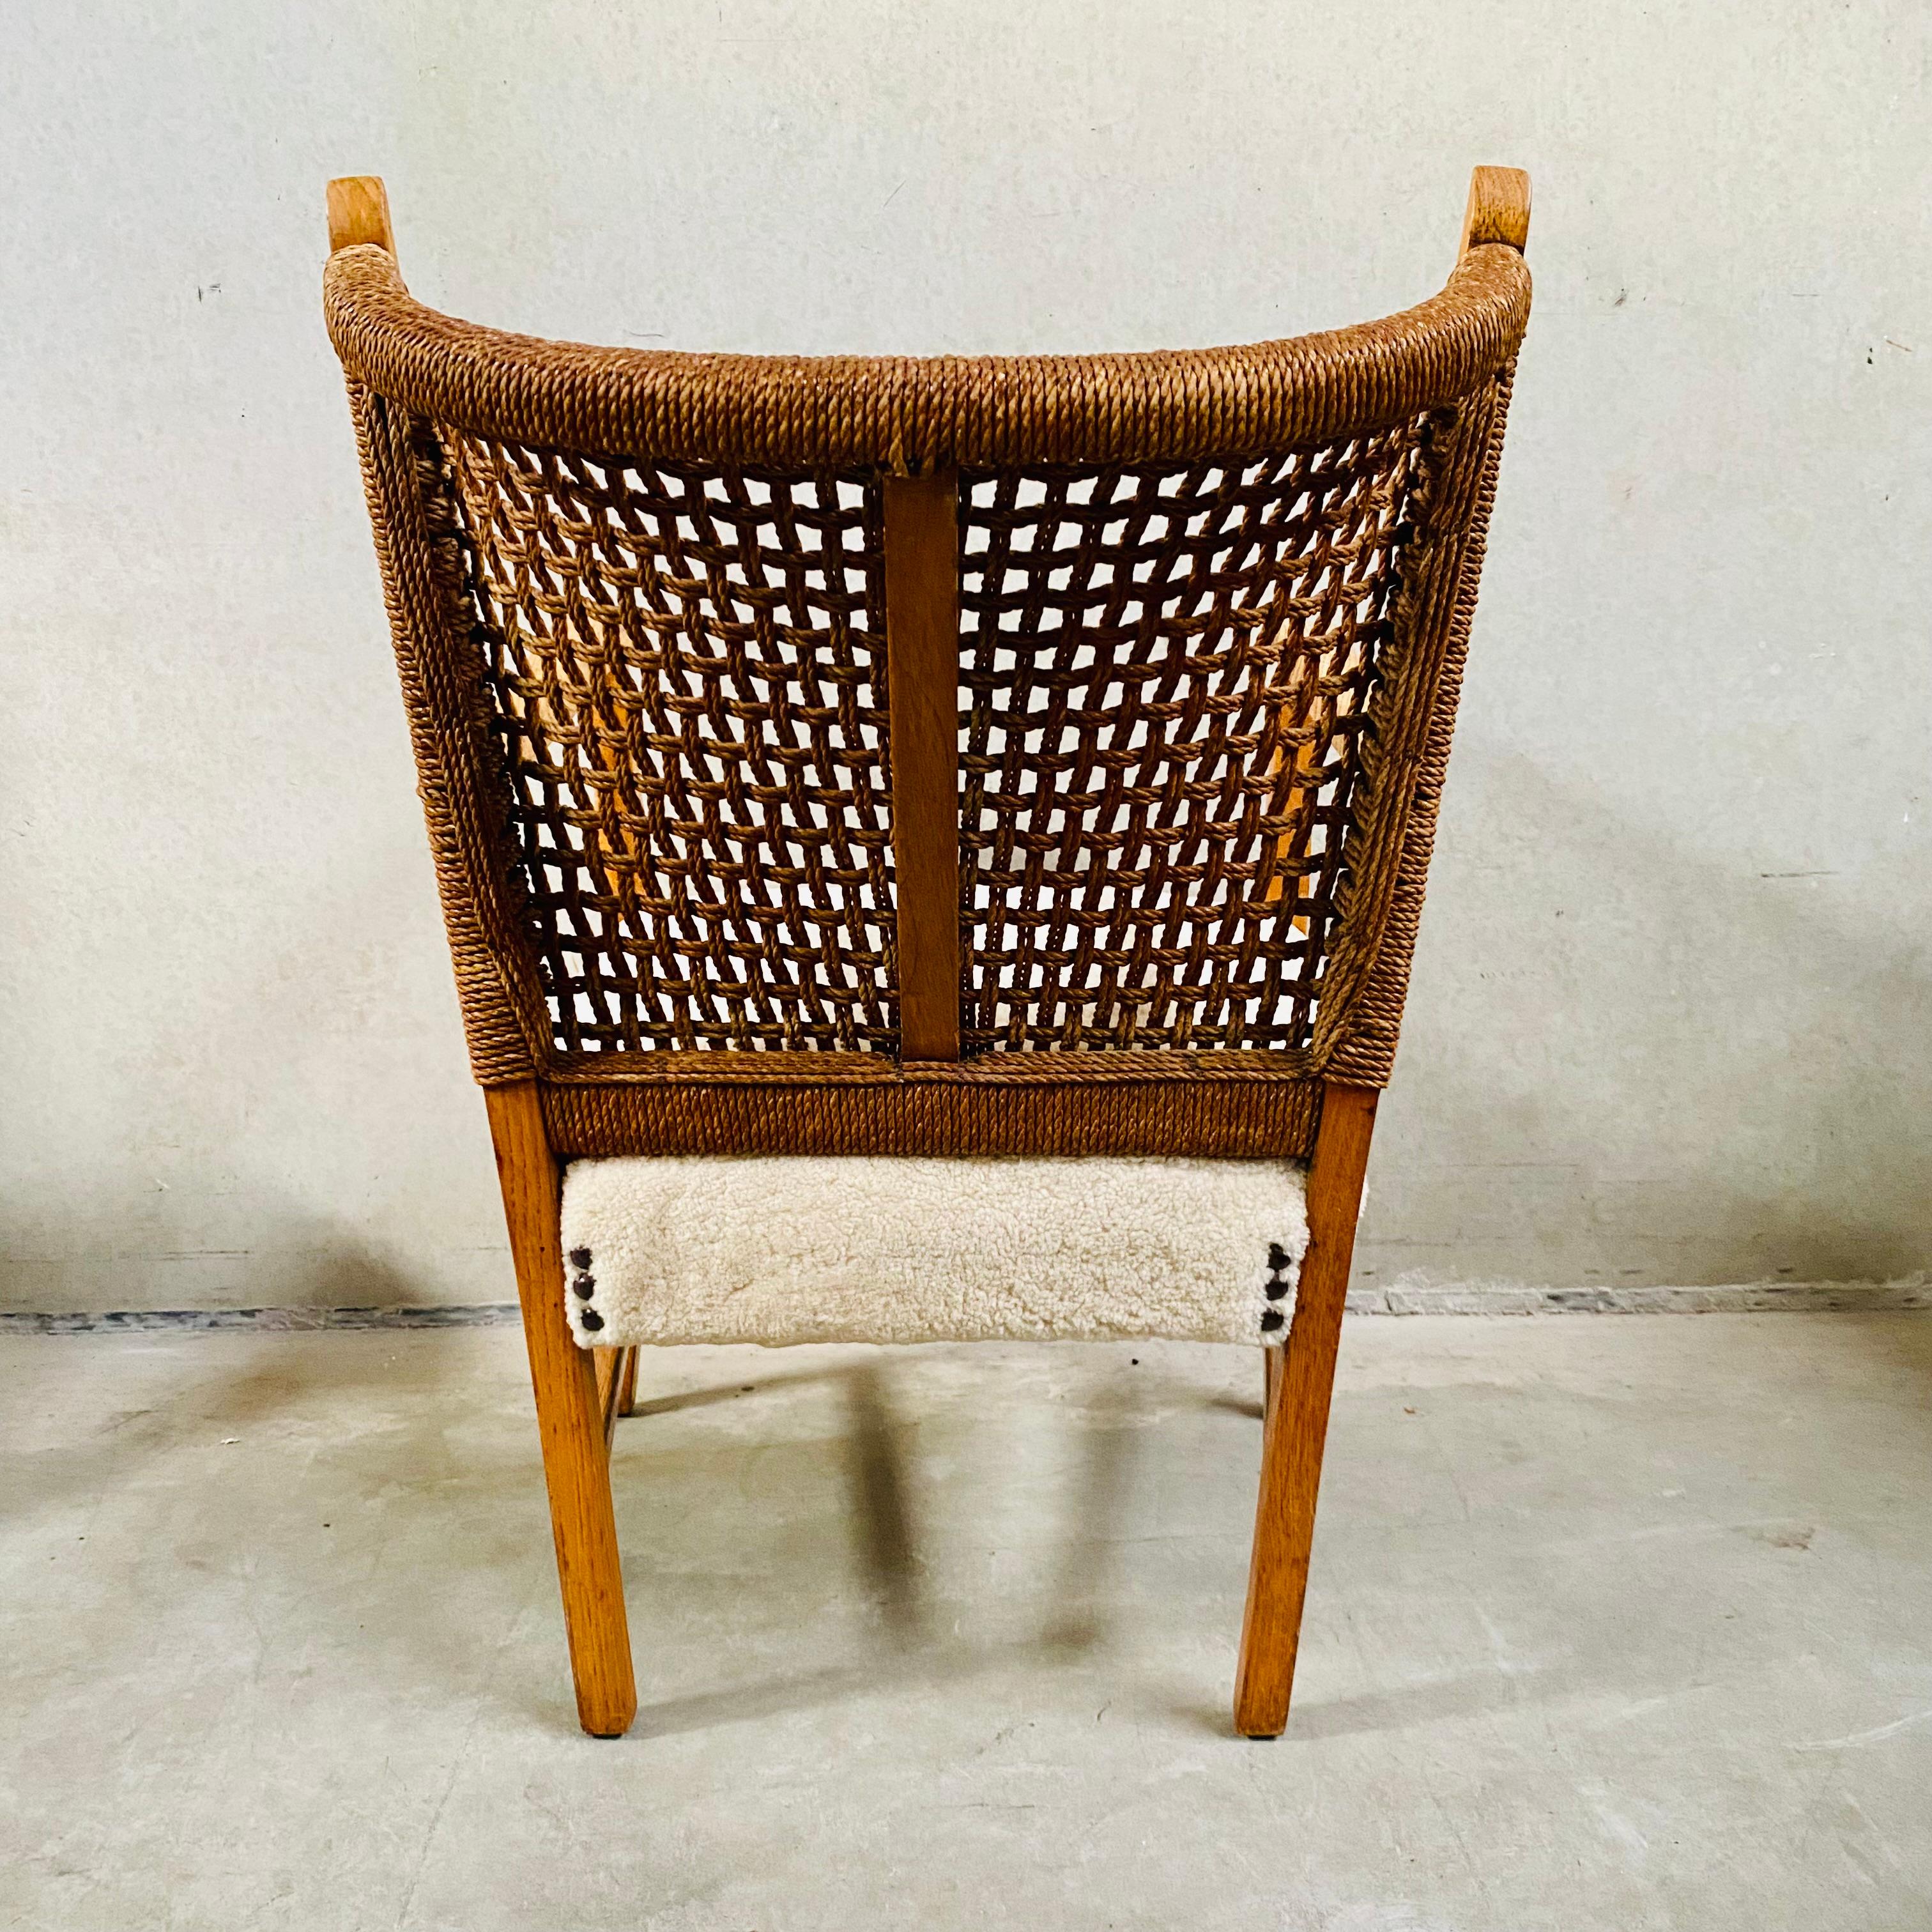 Rope, Oak and Sheepskin Arm Chair by Bas Van Pelt, Netherlands 1940 For Sale 9